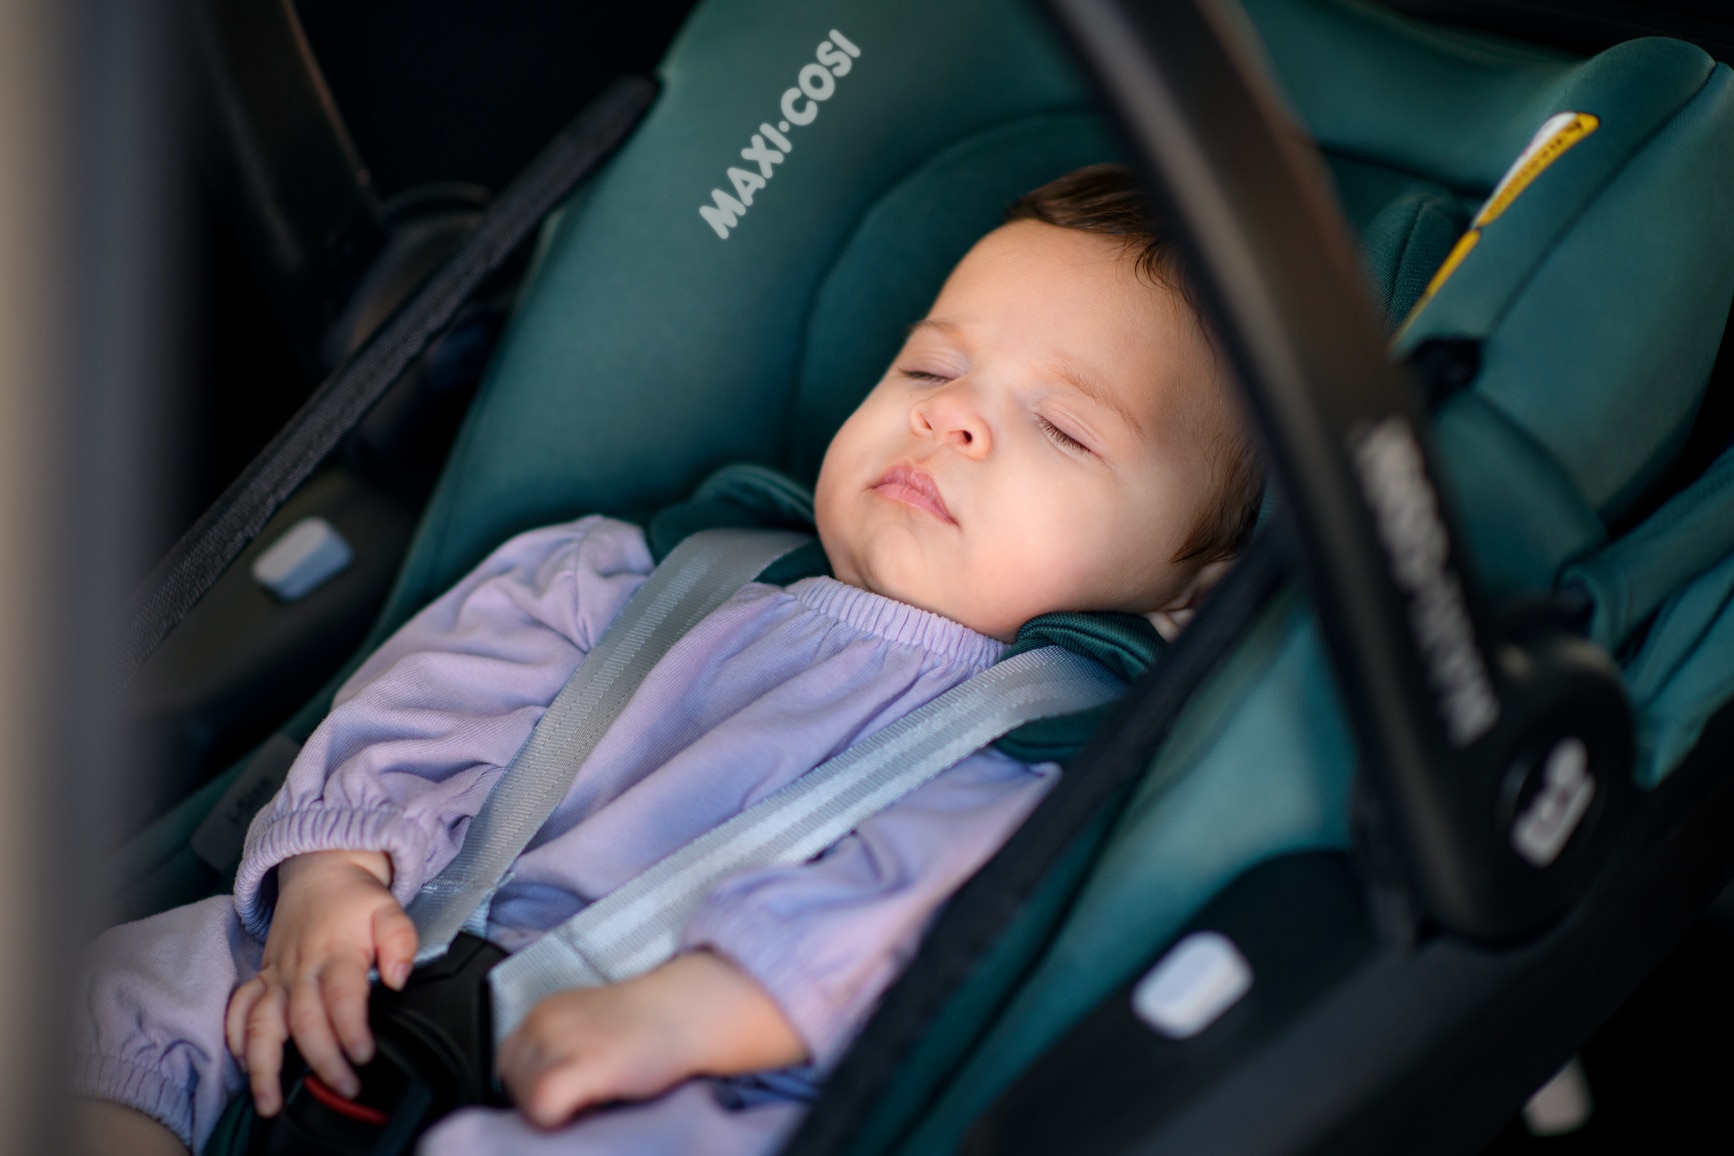 Everything You Need to Know About Sleeping in a Car Seat